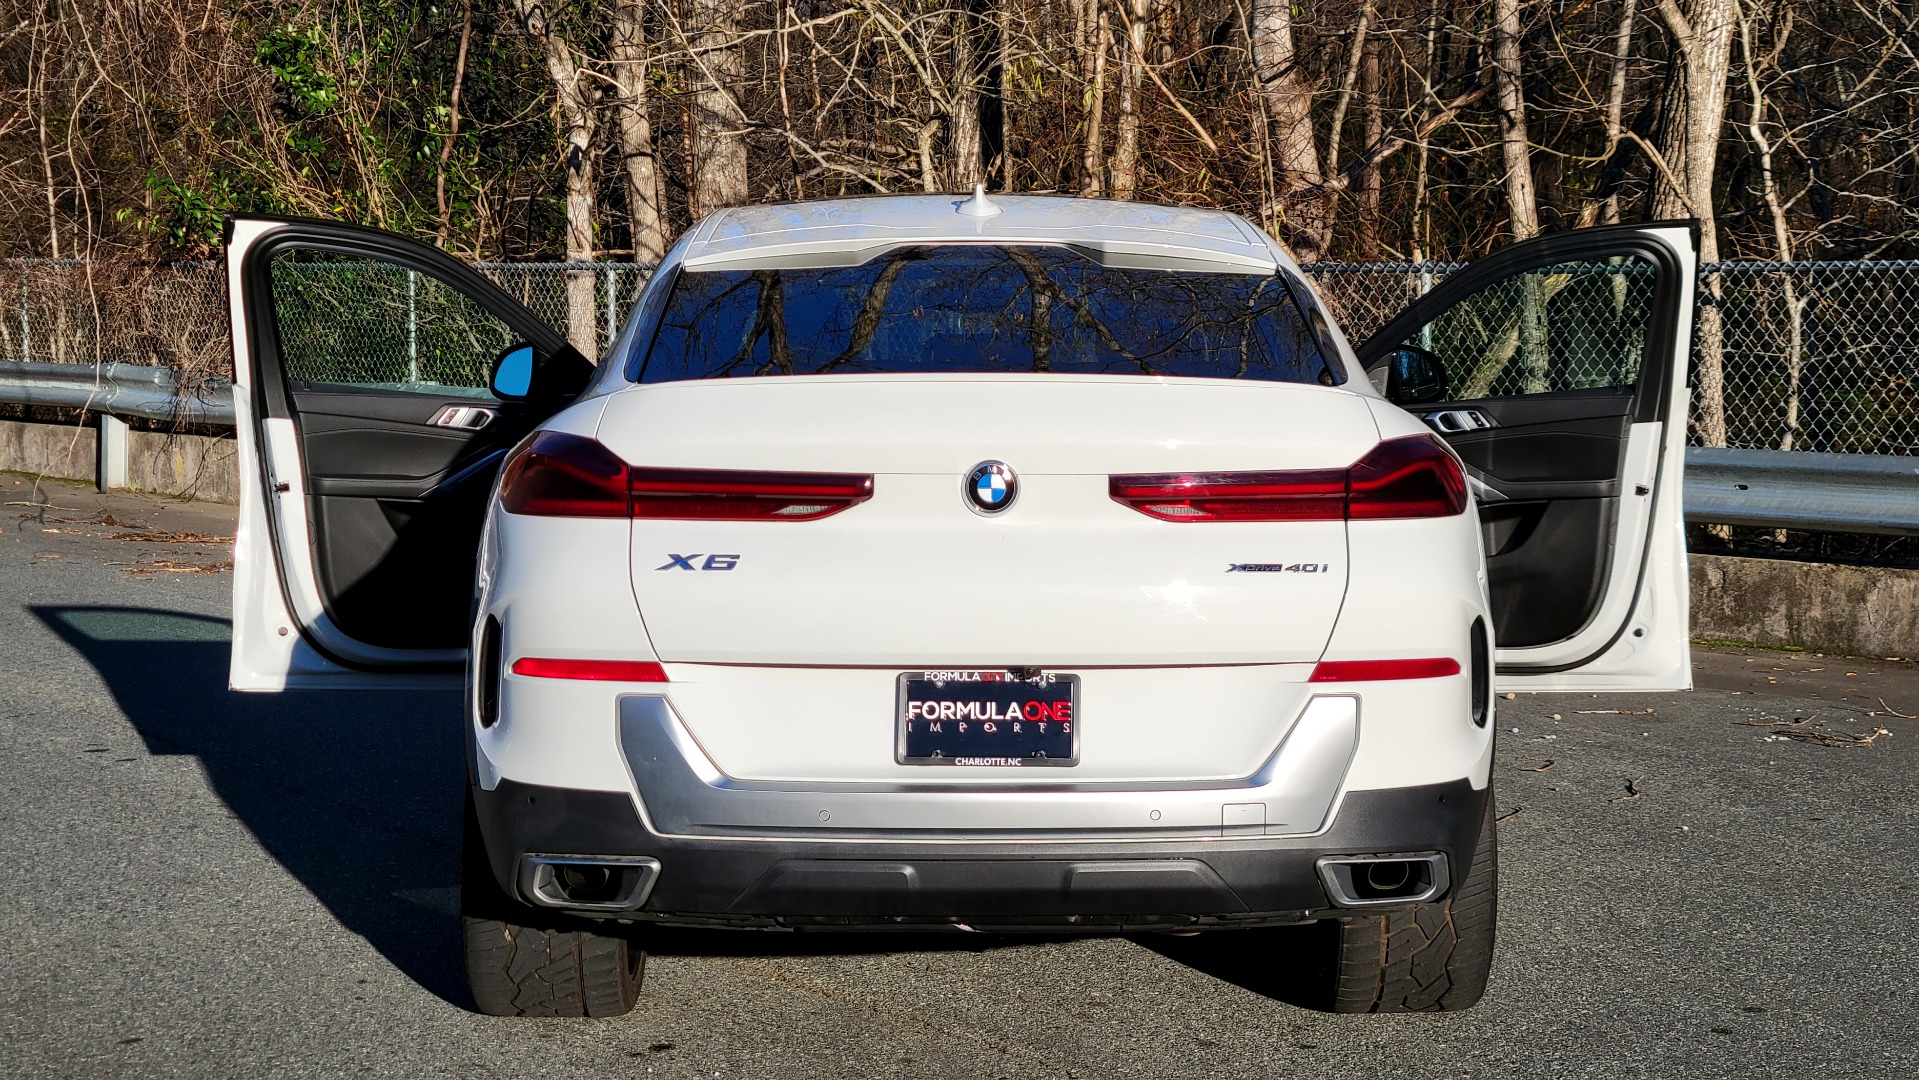 Used 2021 BMW X6 XDRIVE40I PREMIUM / HUD / NAV / H/K SND / SUNROOF / REARVIEW for sale $72,995 at Formula Imports in Charlotte NC 28227 8